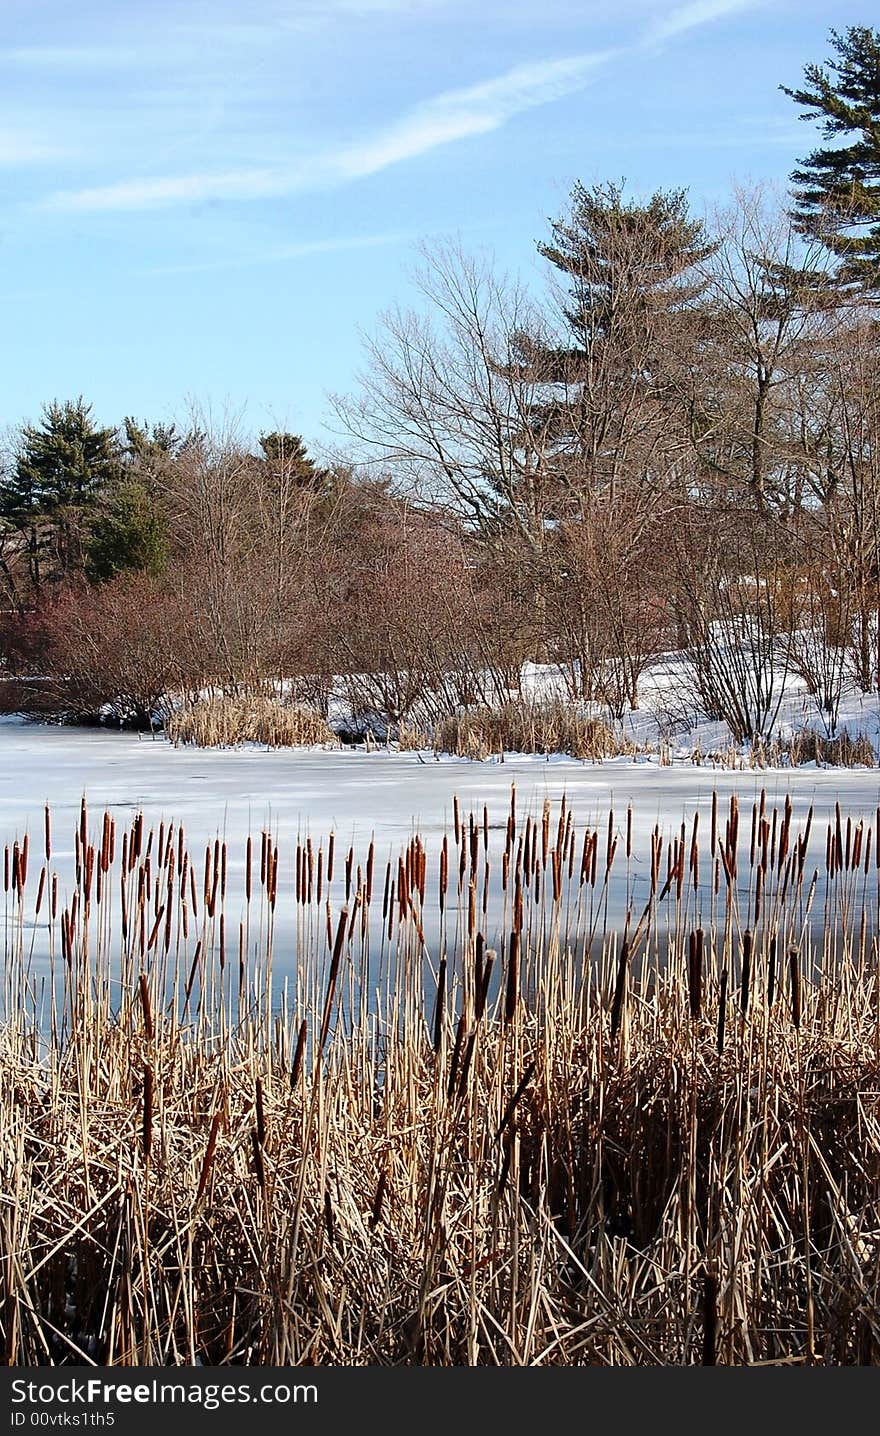 View of the pond and its surrounding vegetation at Institute Park. Late February in Worcester, MA.